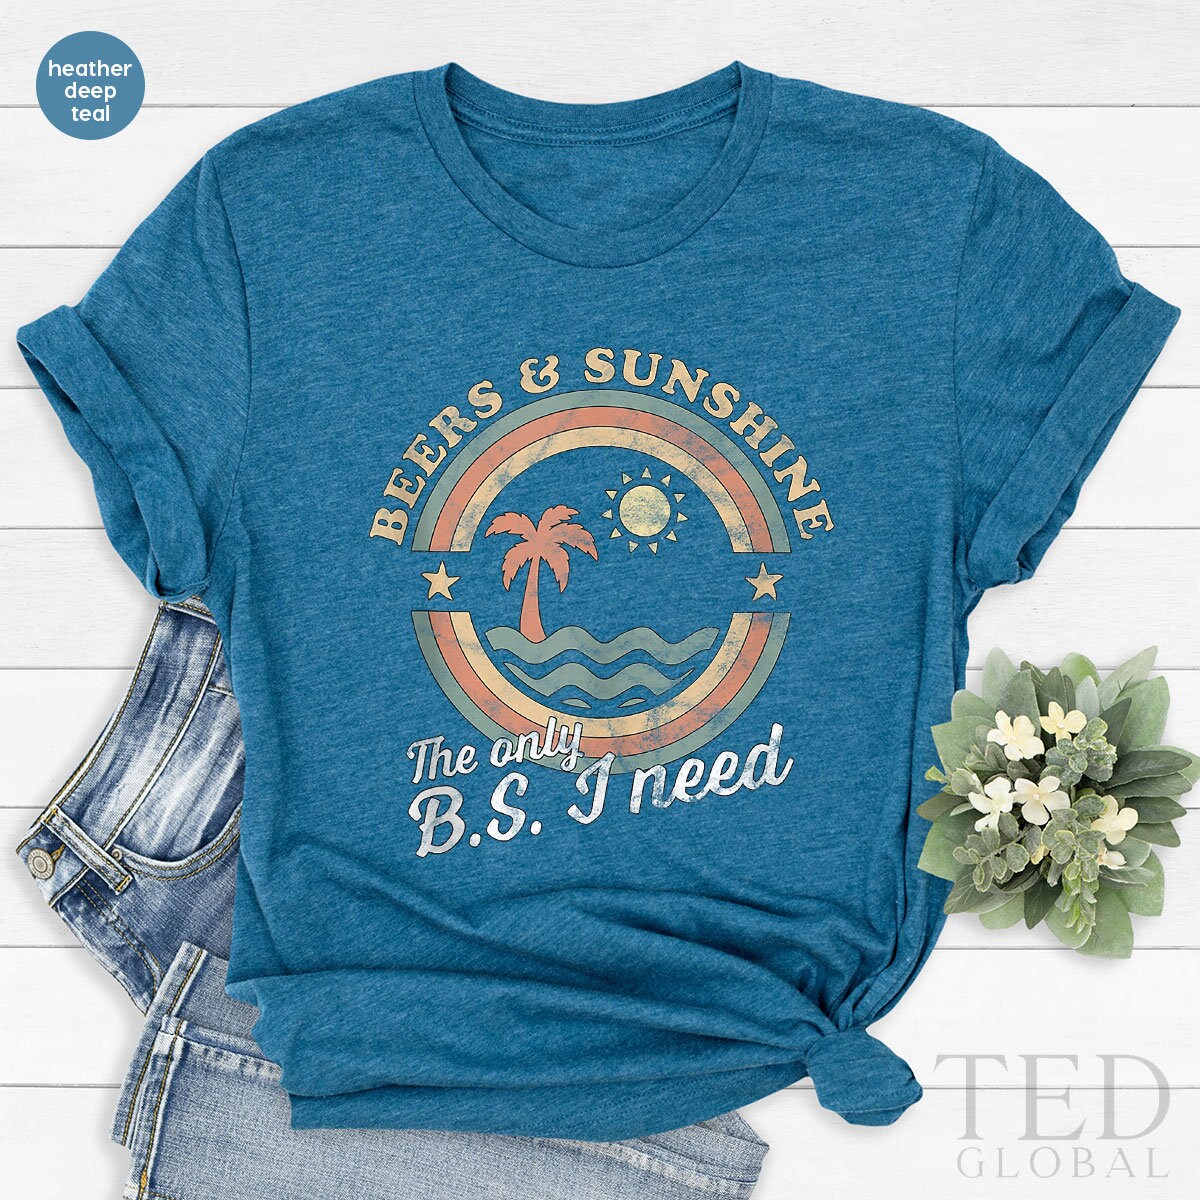 Beer Lover T-Shirt, Beers &Sunshine T Shirt, Alcohol Lover Tee, Vacation Beer Shirts, Beach Shirt, Beer TShirt, Gift For Drinker Lover - Fastdeliverytees.com